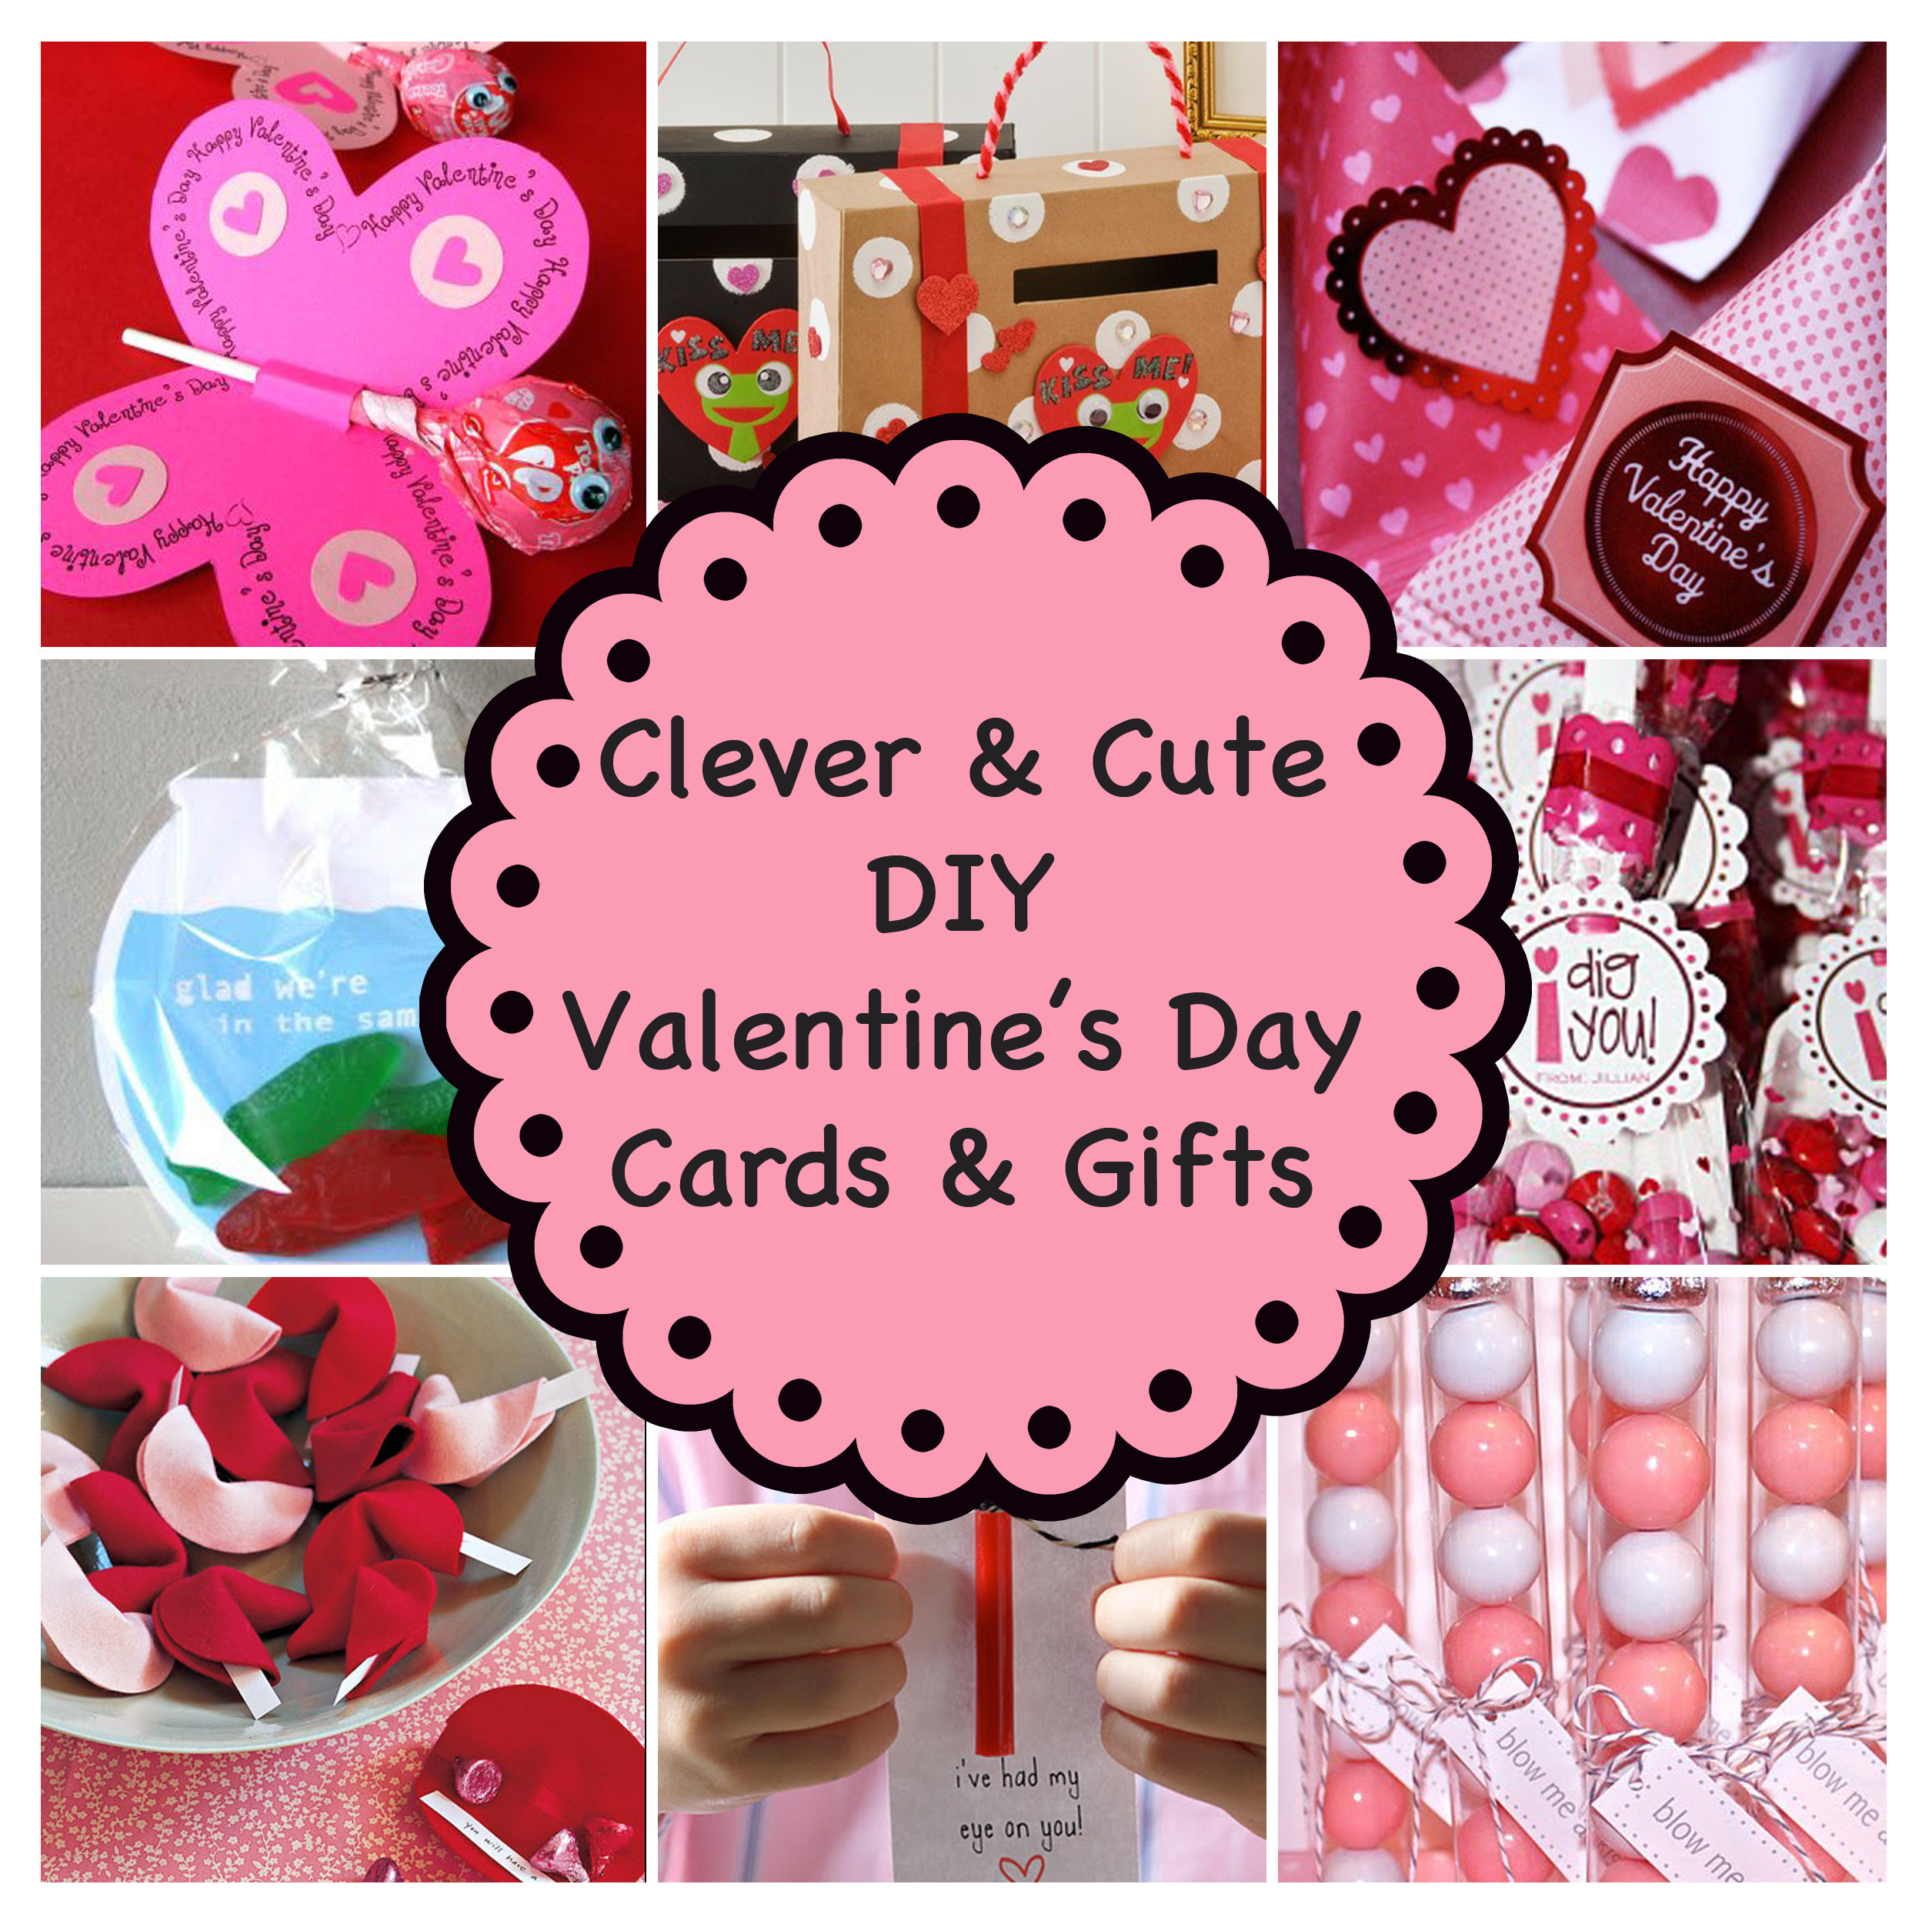 Friend Valentines Day Gift Ideas
 Clever and Cute DIY Valentine’s Day Cards & Gifts